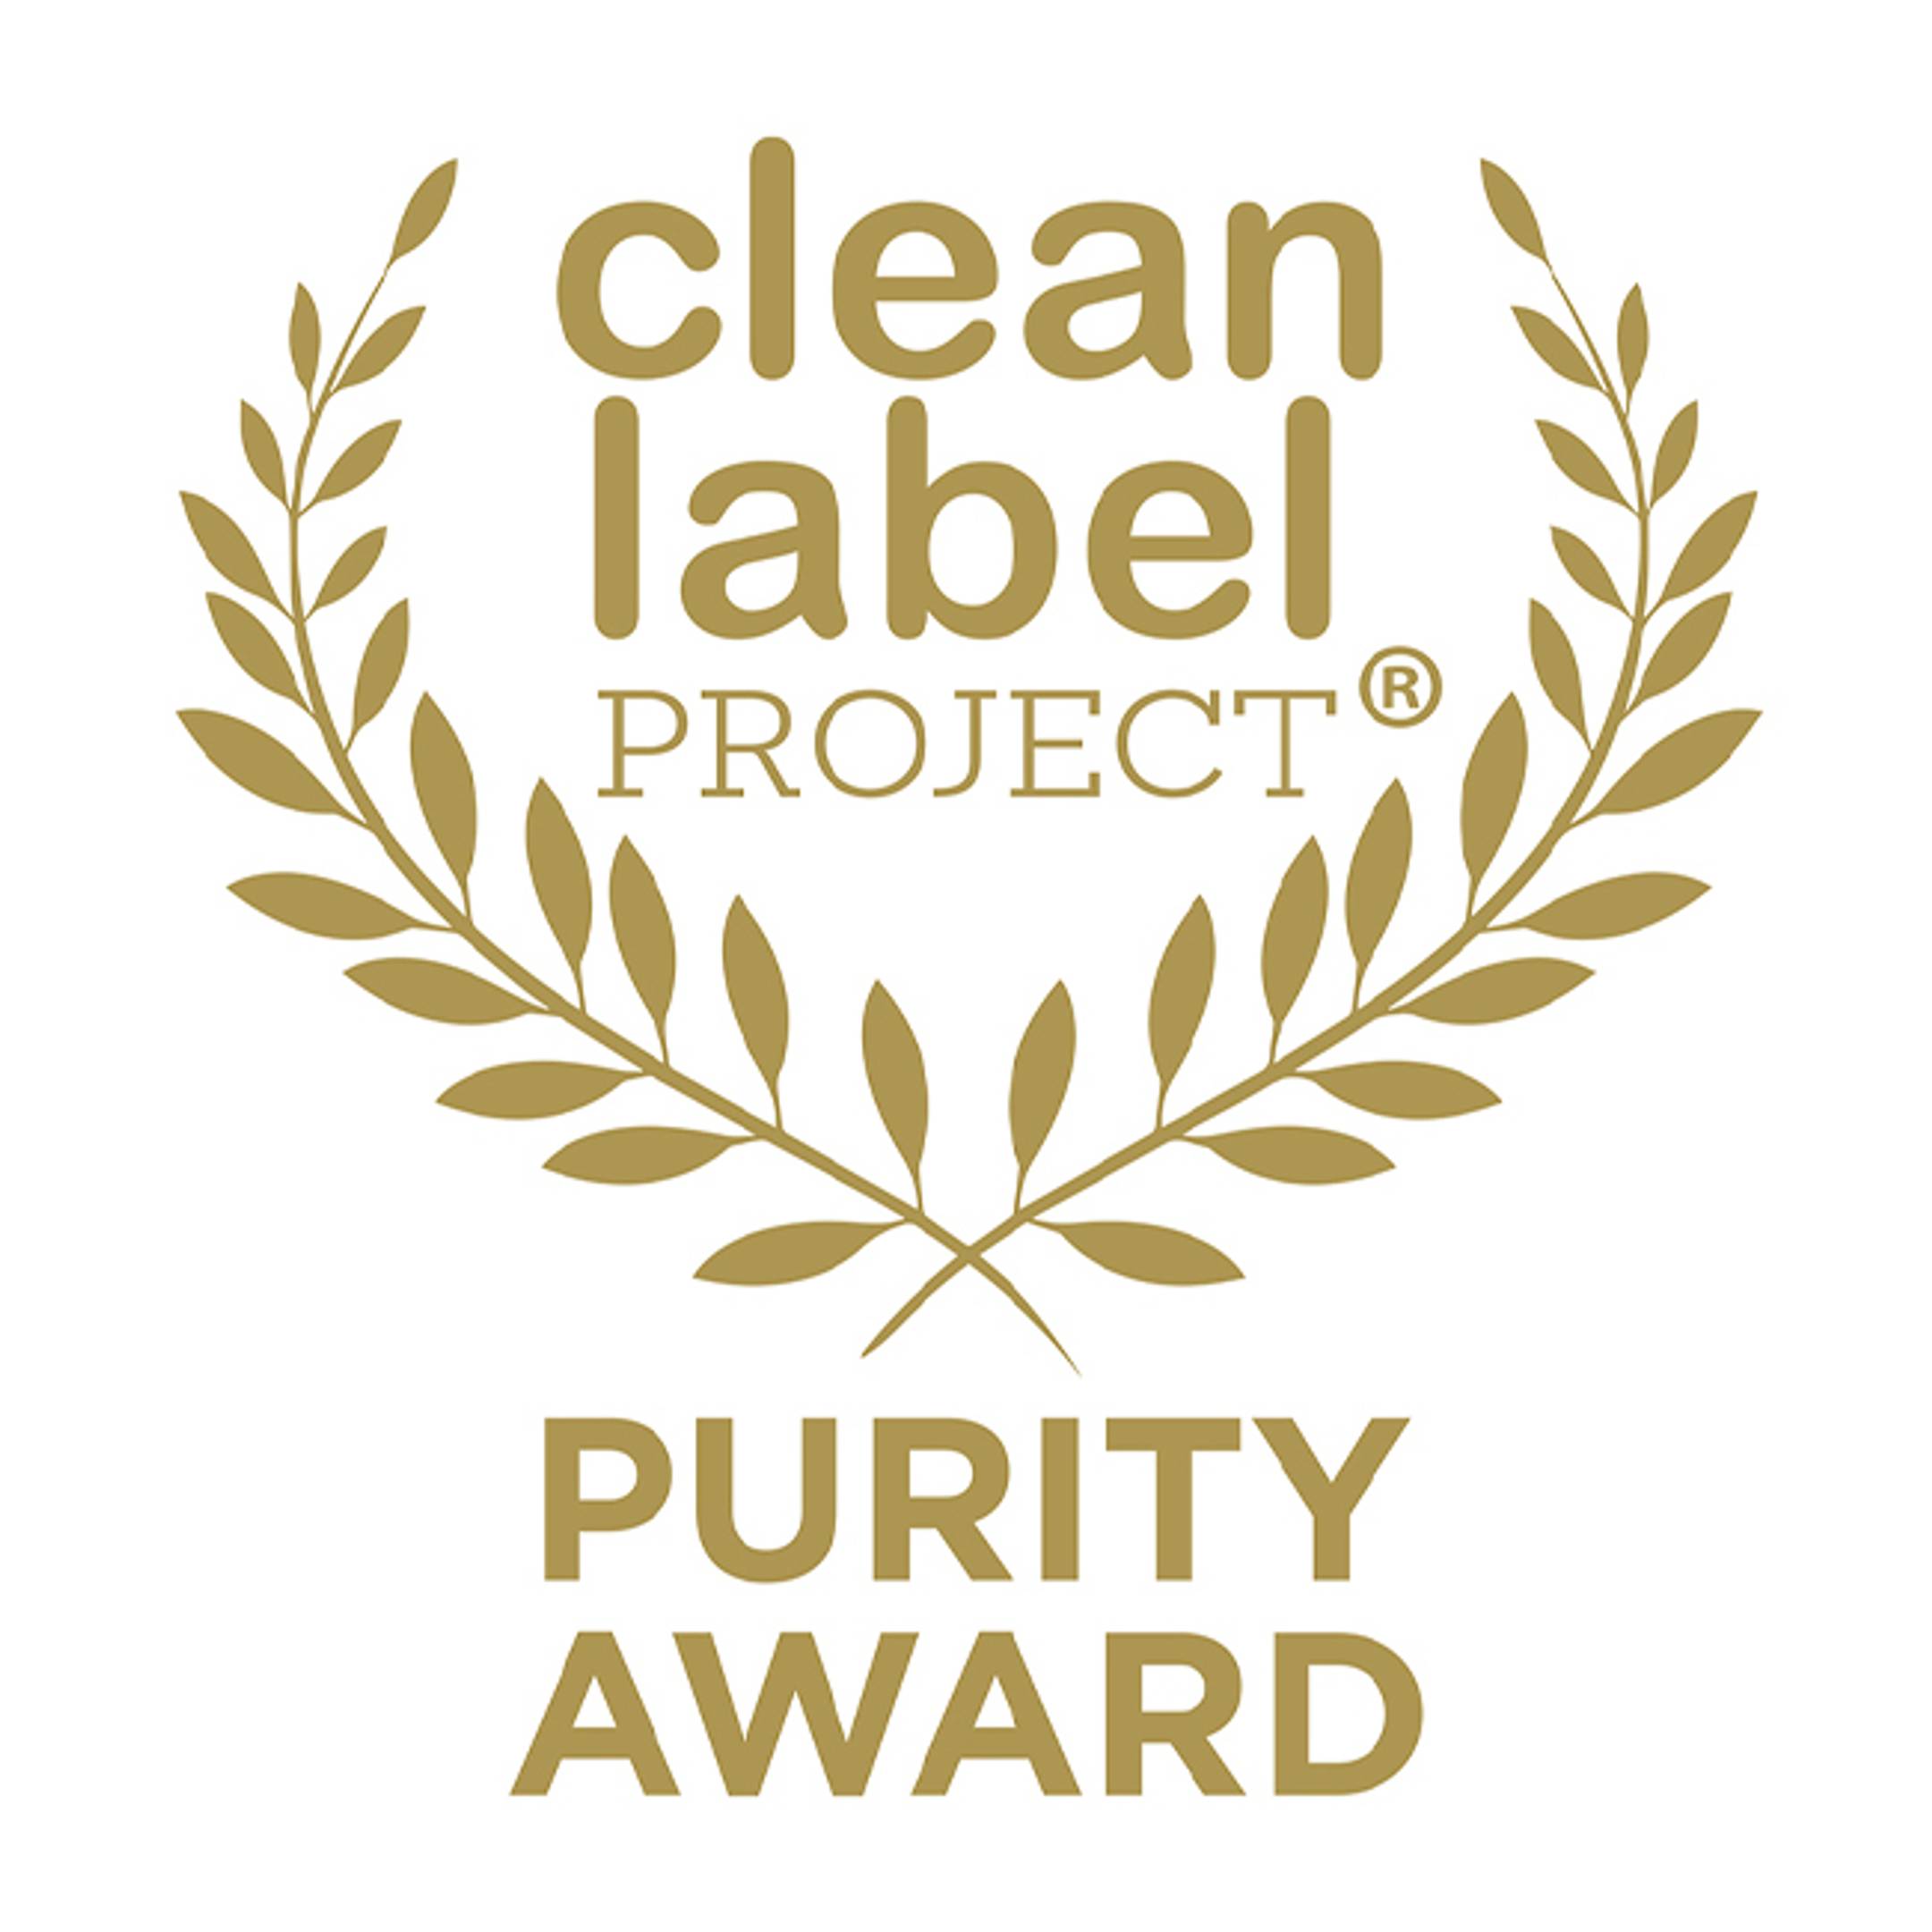 Clean Label Project Purity Award
